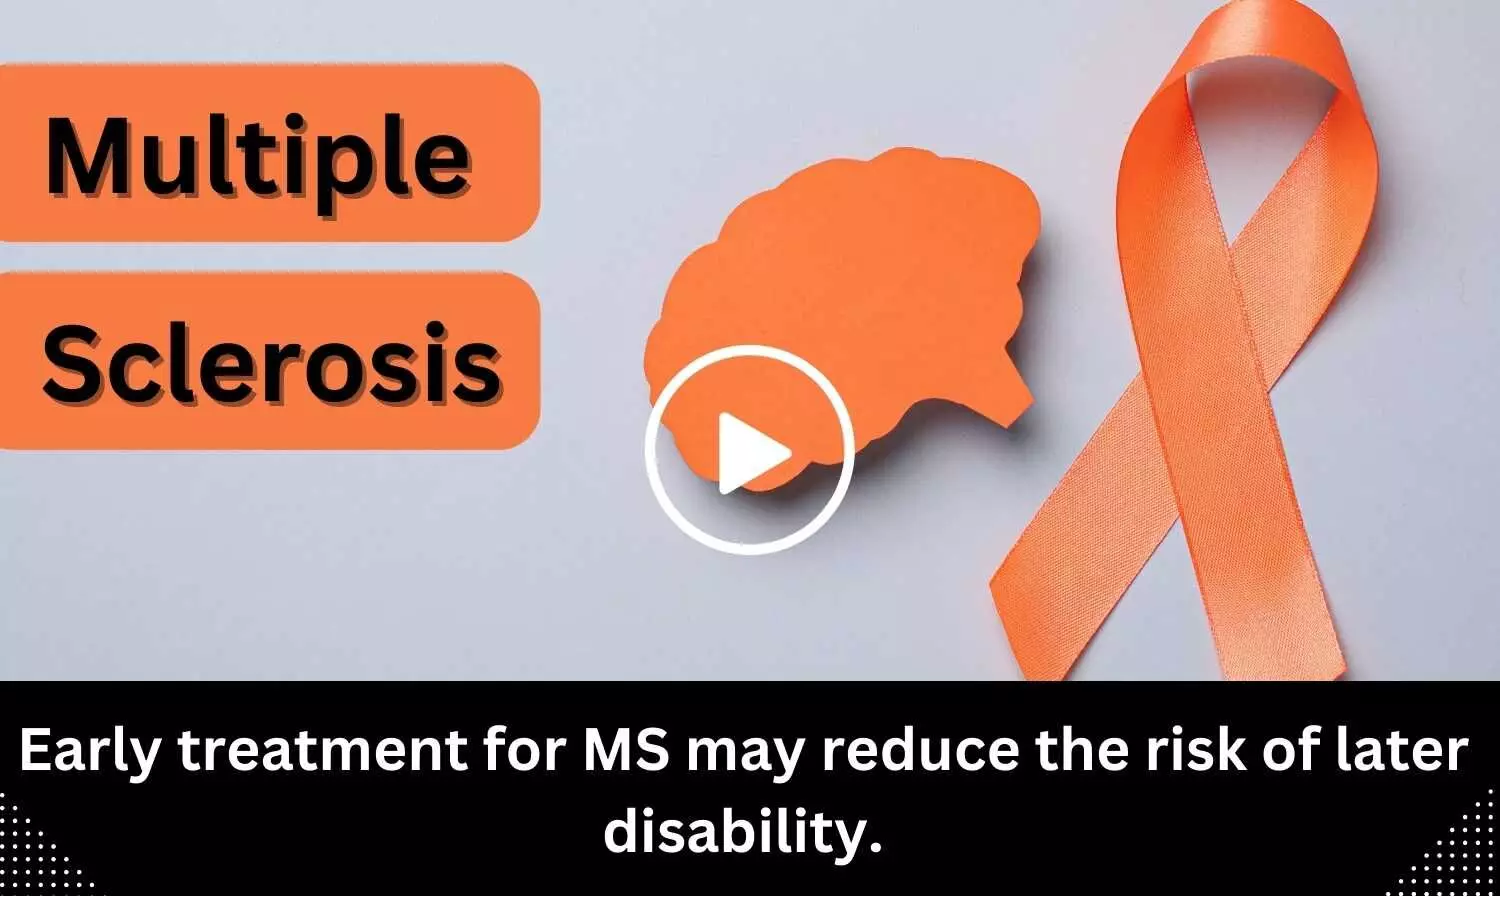 Early treatment for MS may reduce the risk of later disability.